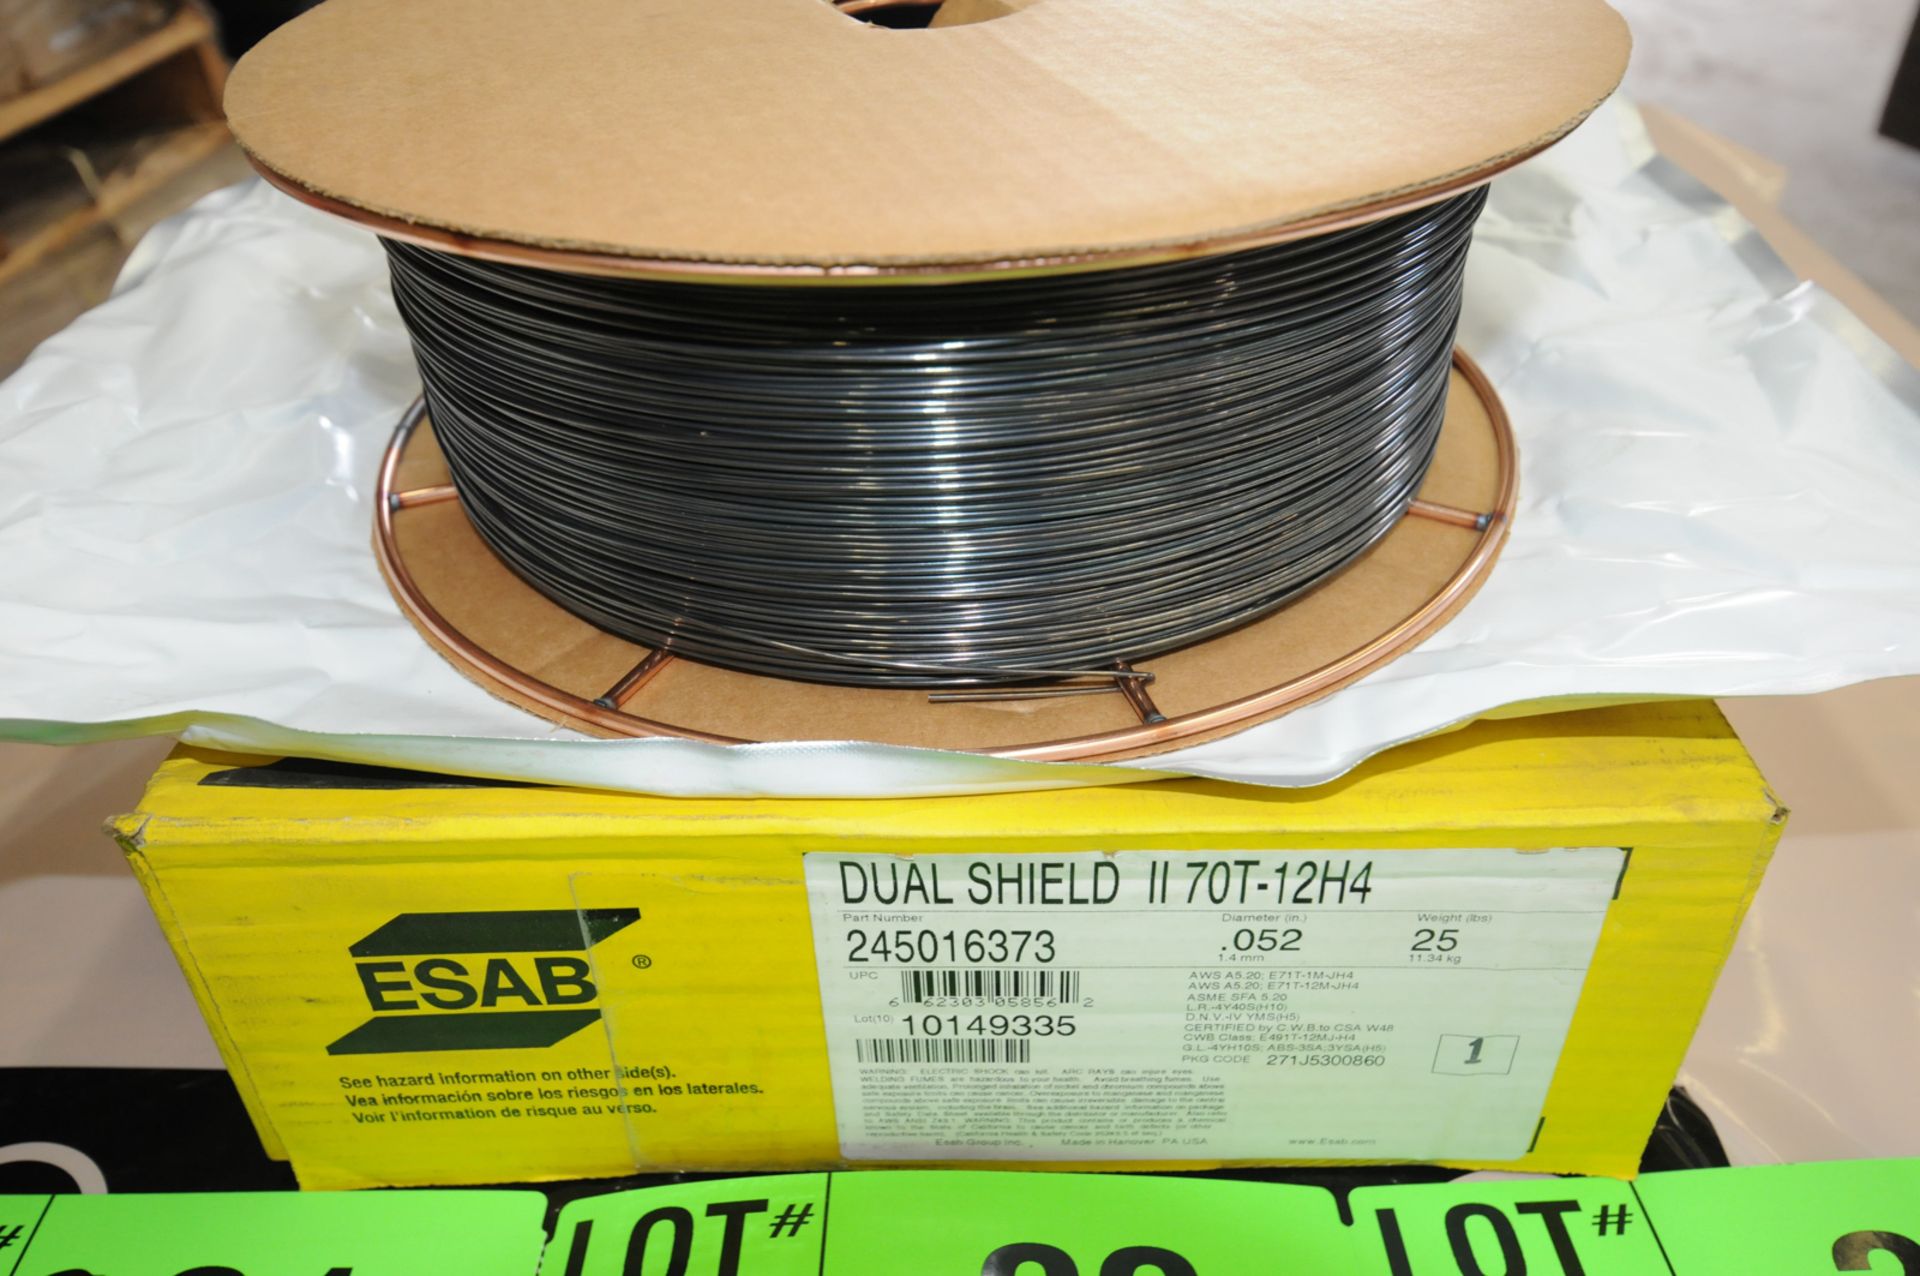 LOT/ (10) 25LB SPOOLS OF ESAB DUAL SHIELD II 70T-12H4 0.052" DIAMETER WELDING WIRE CONFORMING TO AWS - Image 2 of 4